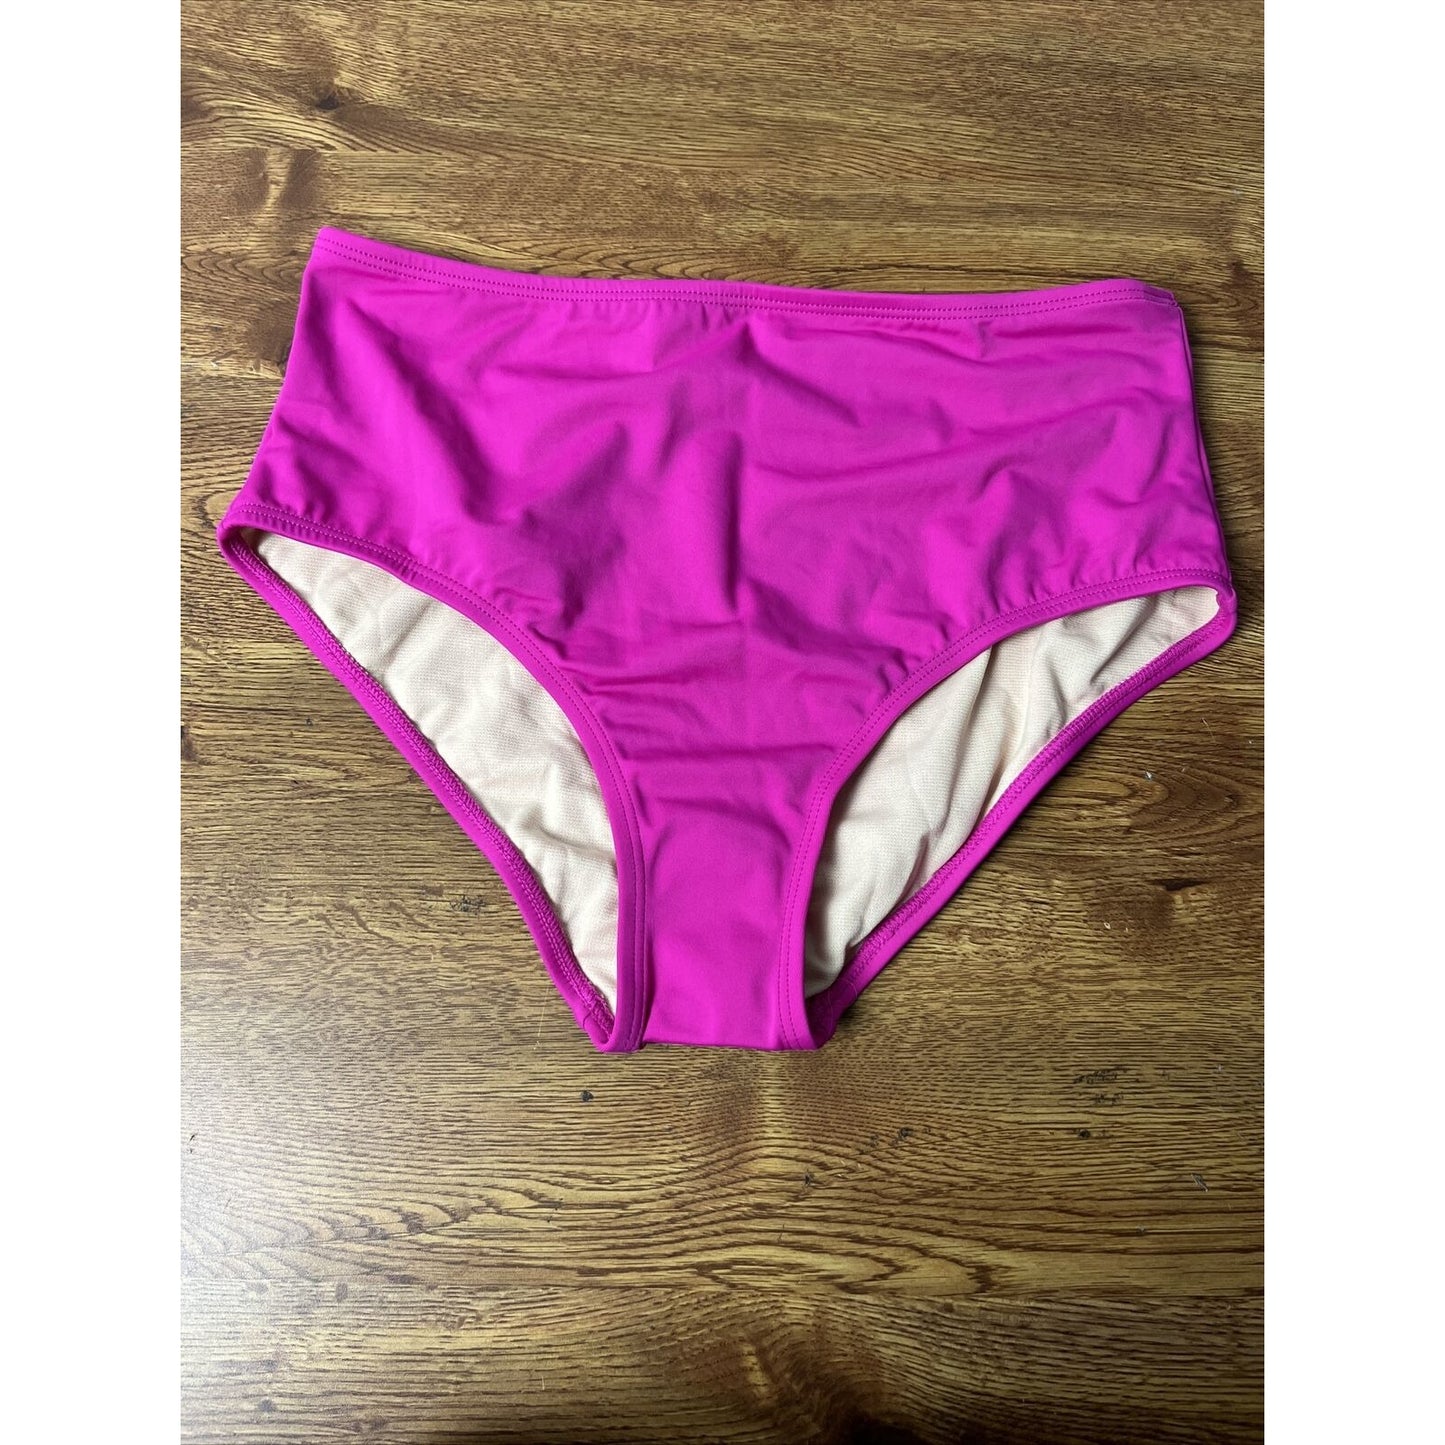 Kim Gravel x Swimsuits For All Women's Hanky Halter Top & Brief Set Pink Size 6